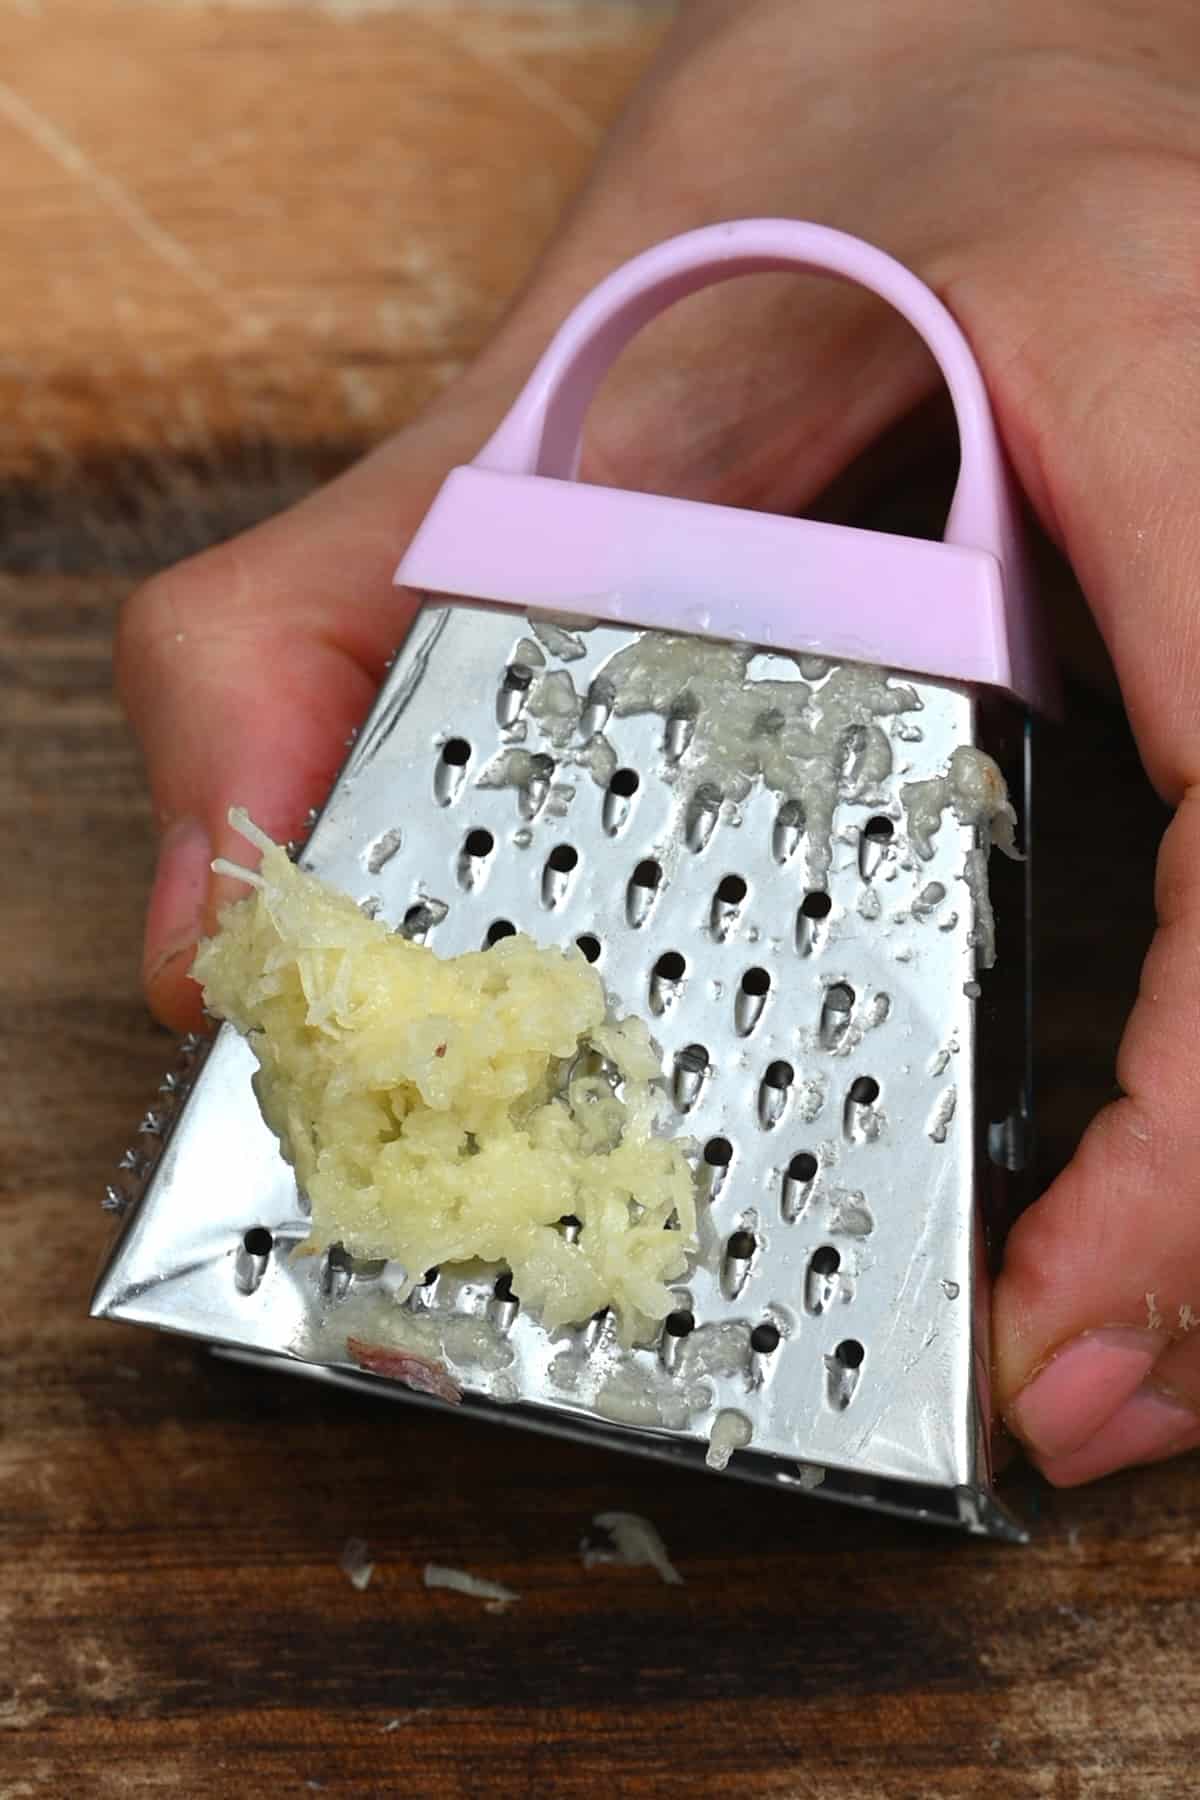 Grated garlic on a box grater